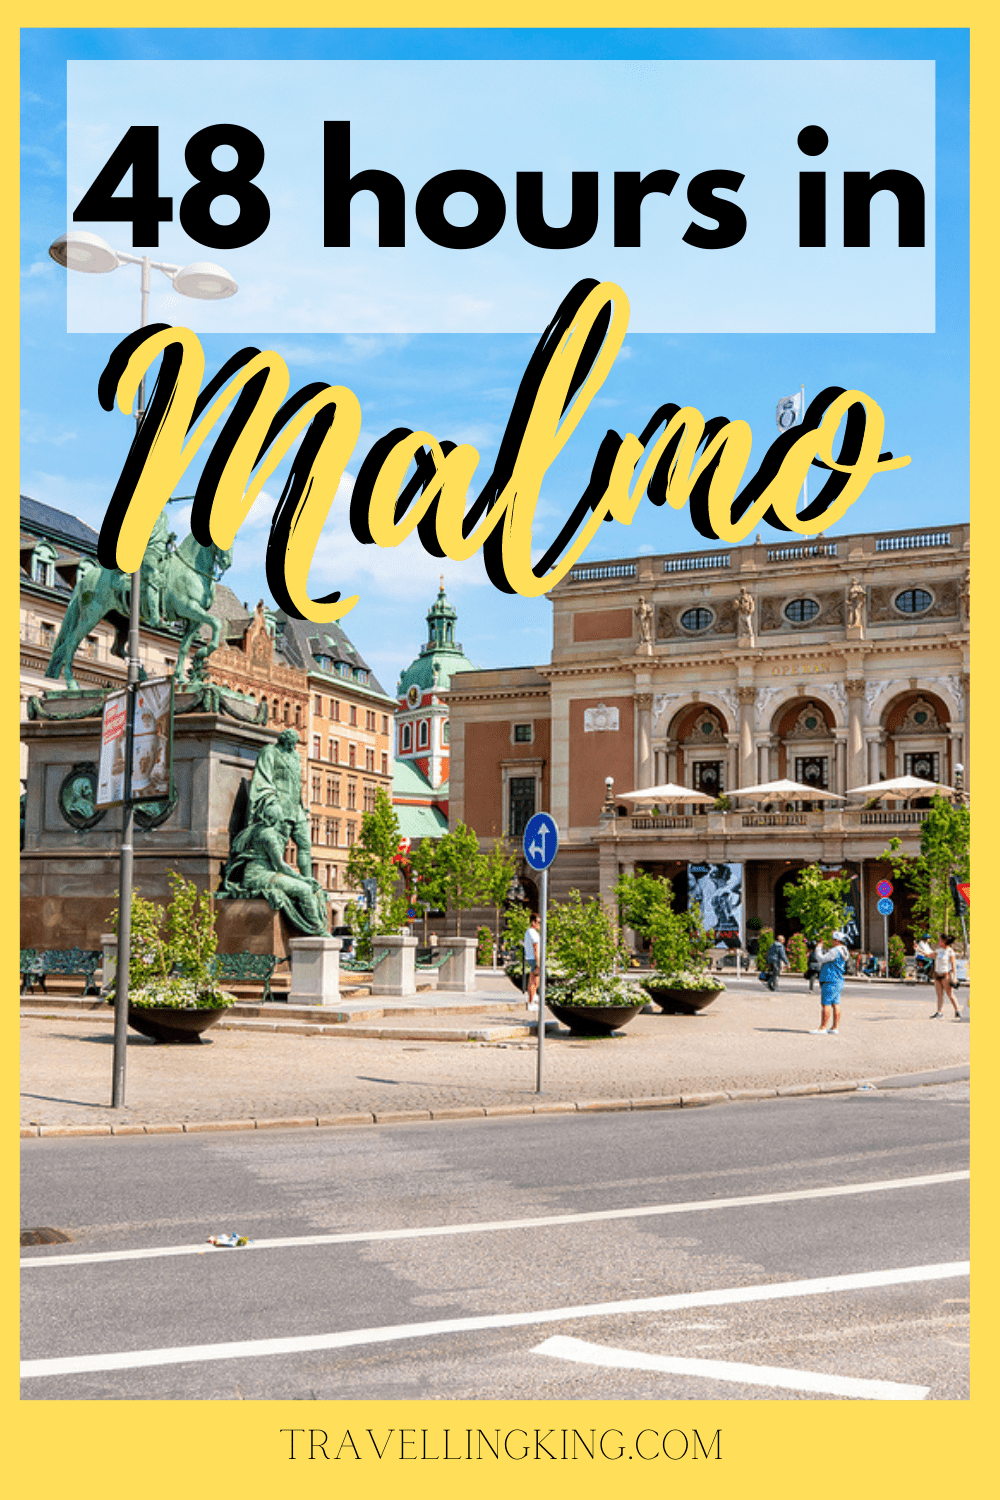 48 hours in Malmo - 2 Day Itinerary